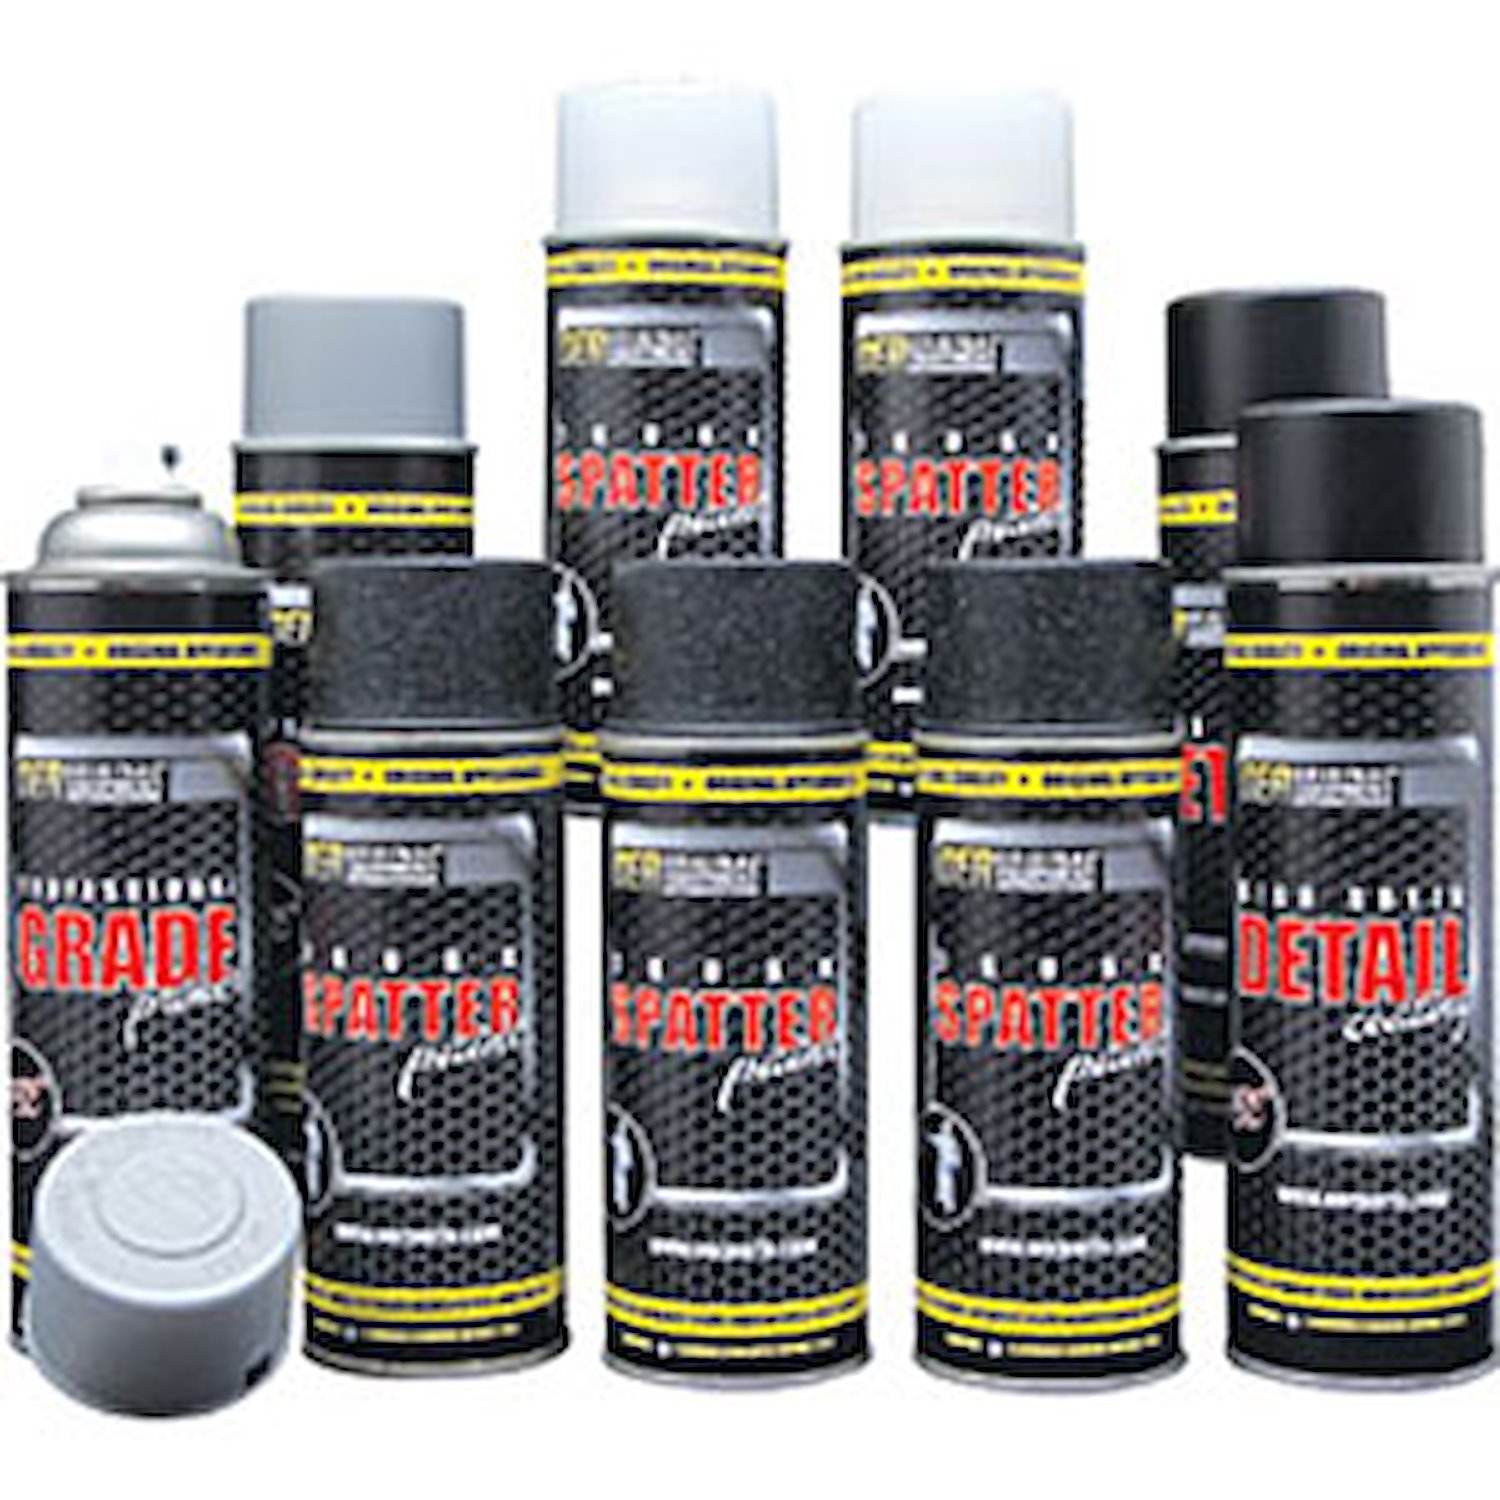 K51495 Trunk Refinishing Kit With Self-Etching Gray Primer OER Gray and White